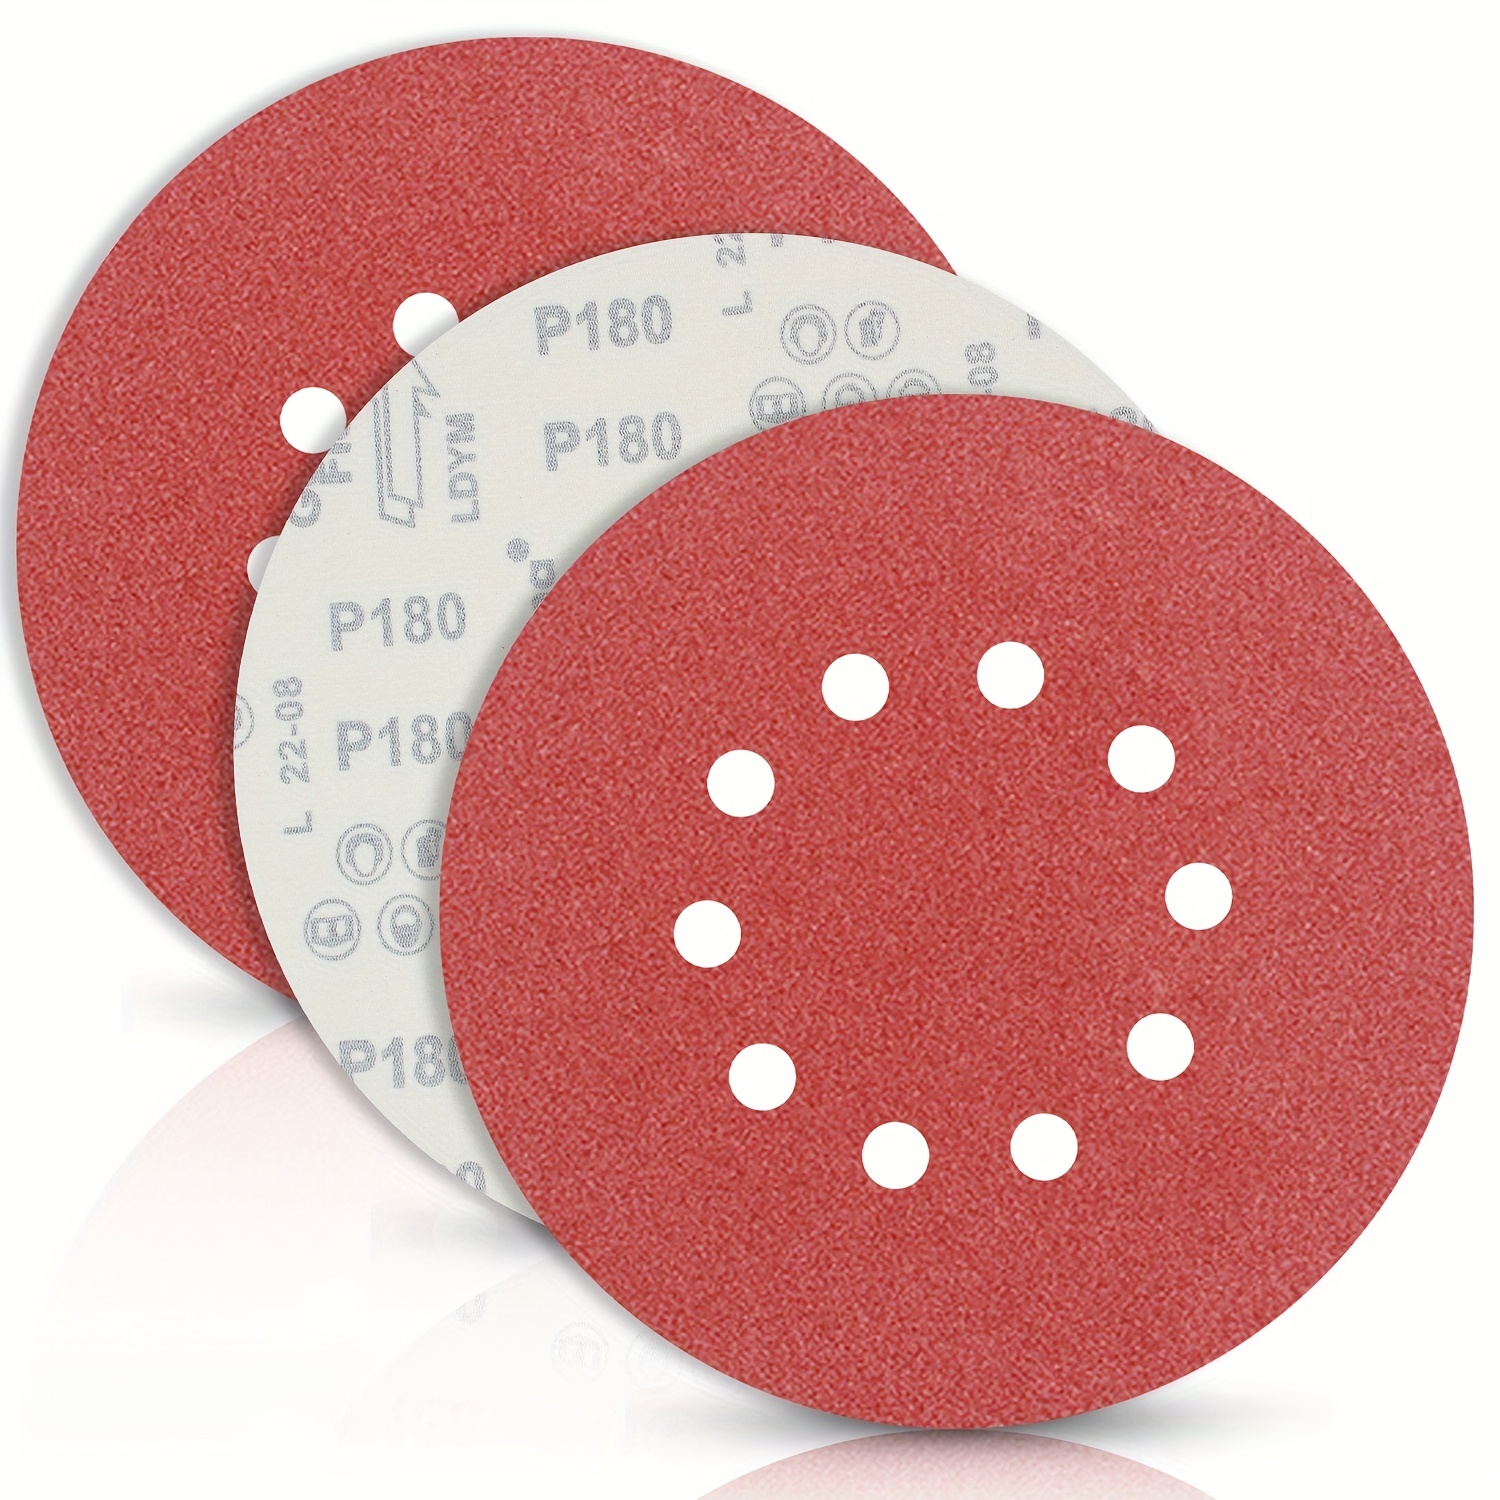 

10pcs 225mm Sanding Disc 10 Holes. Hook And Loop Discs Sandpaper 9 Inches, Grinding Wheels Diameter 225mm, Red Punched For Drywall Sander Sanding Pads